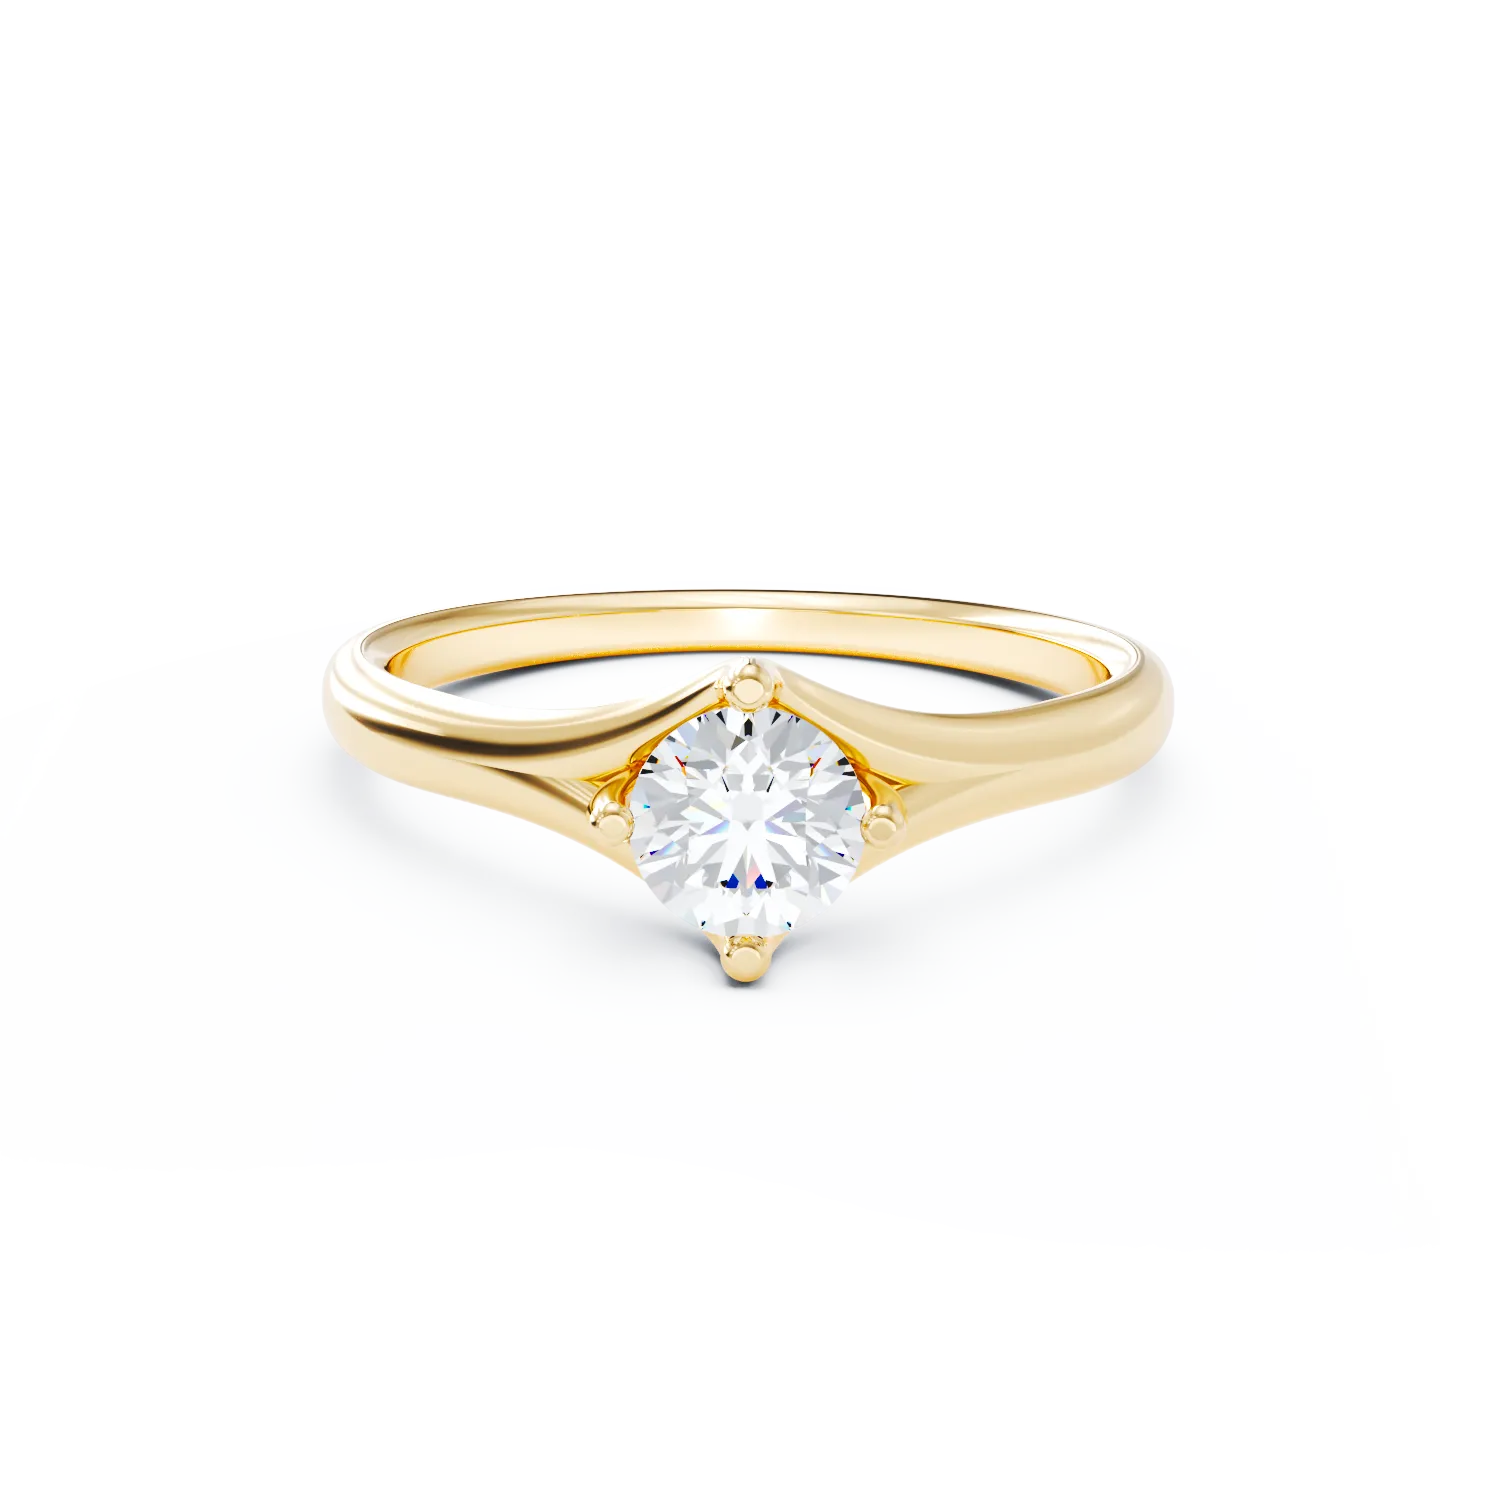 18K yellow gold engagement ring with 0.5ct diamond